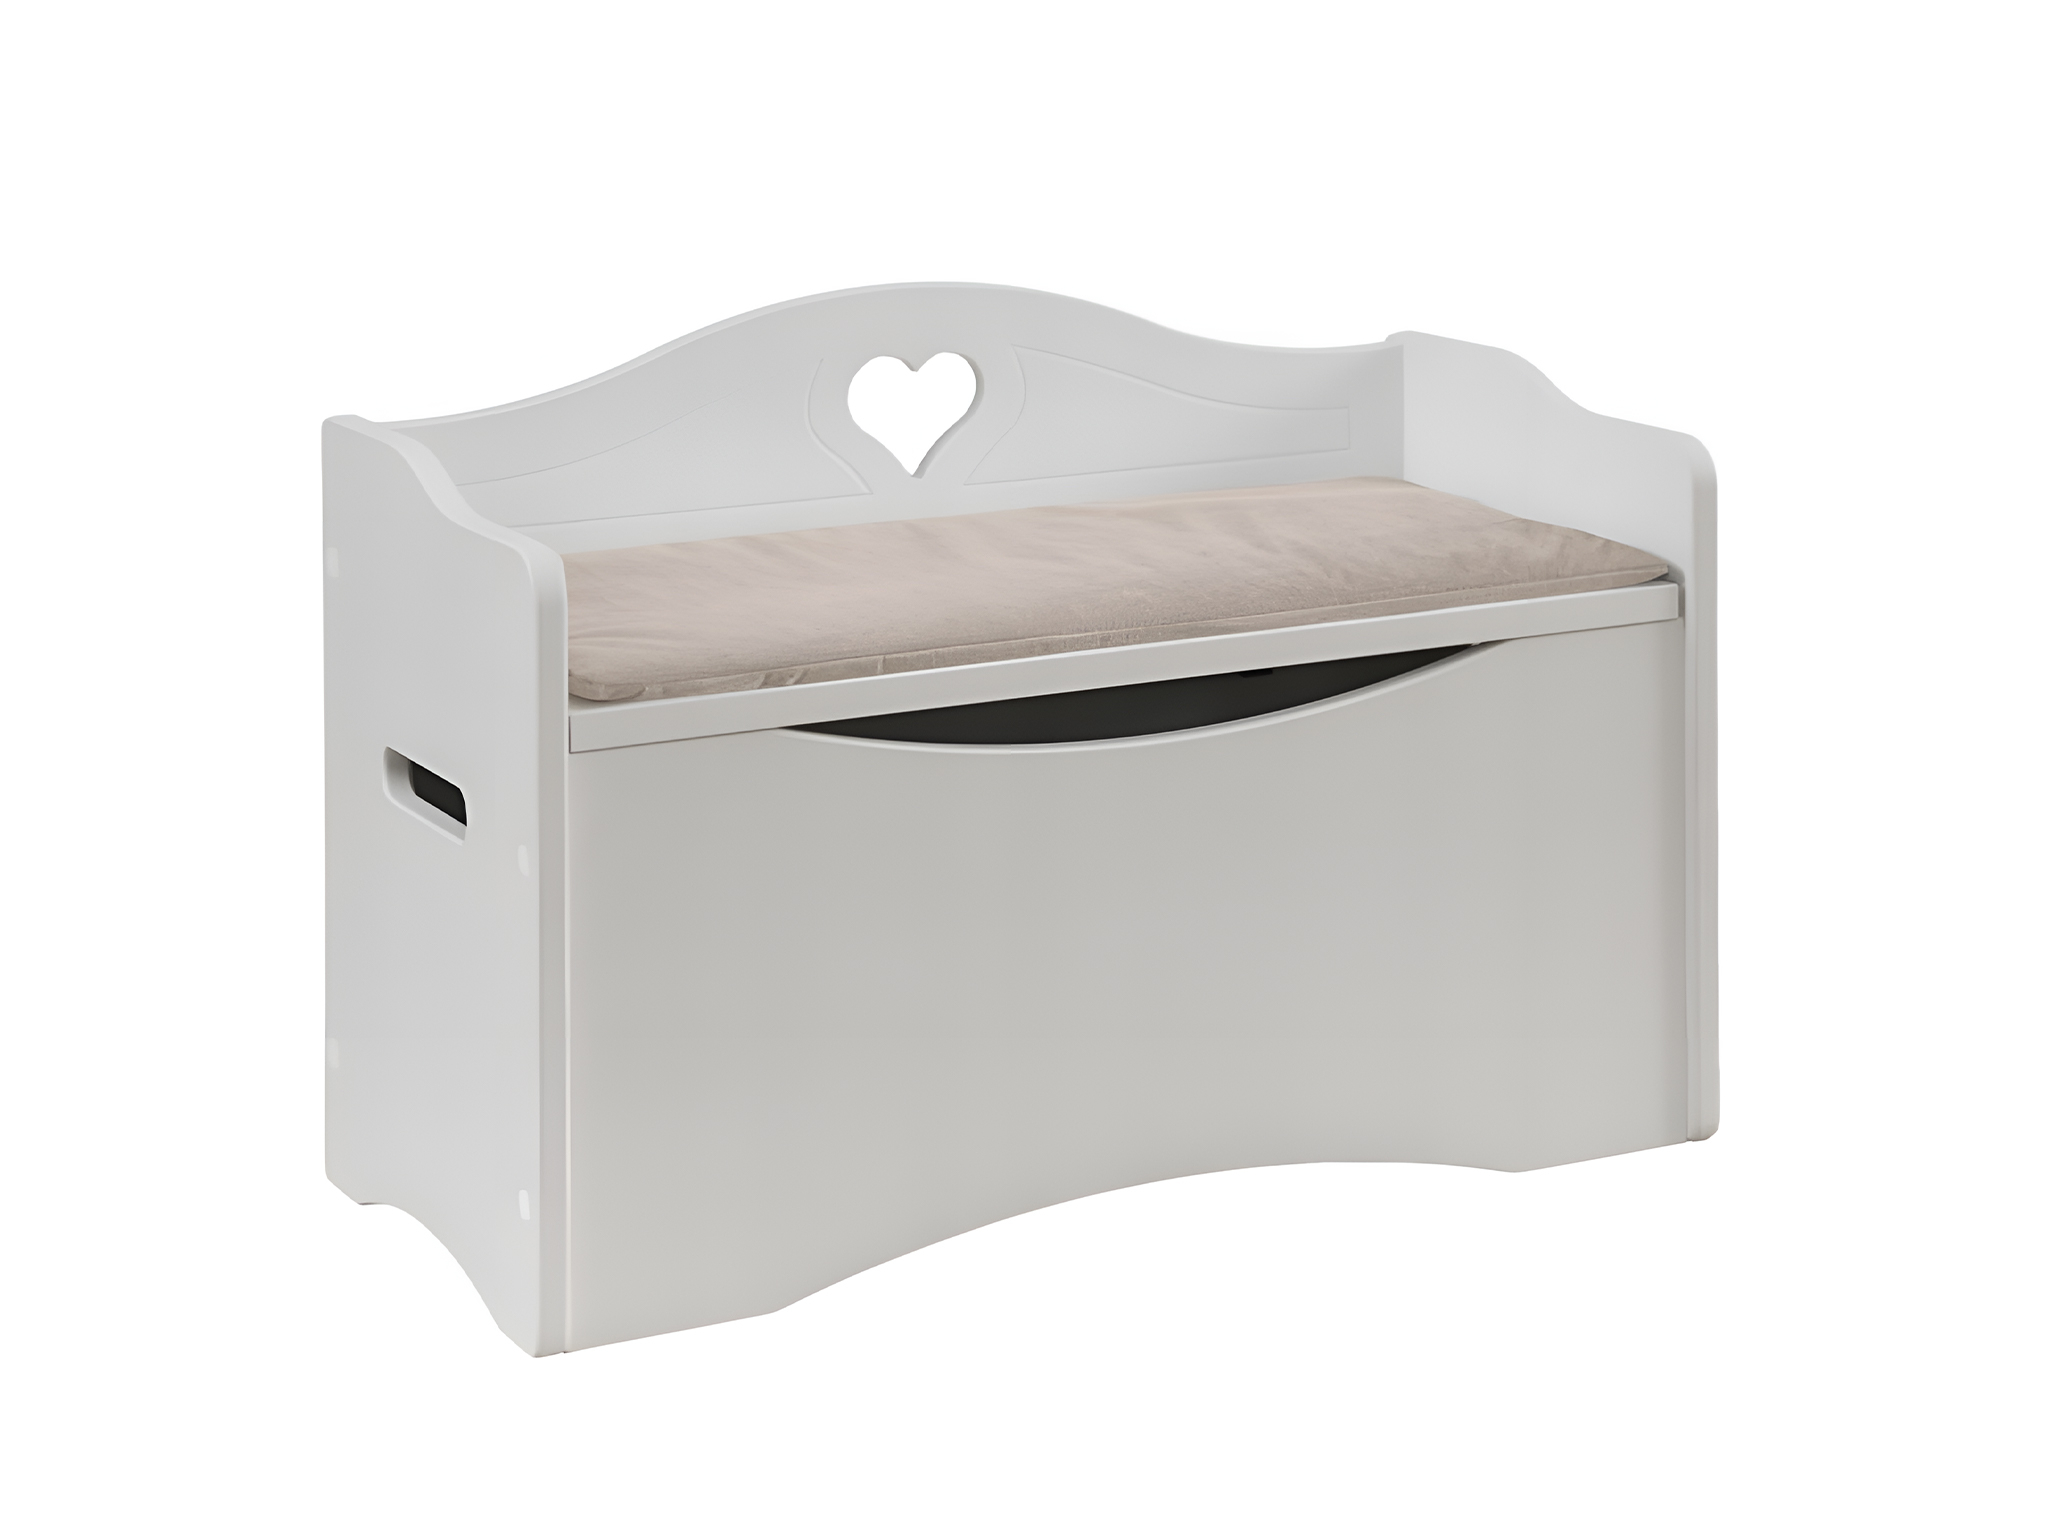 Toy box with heart motif - beige